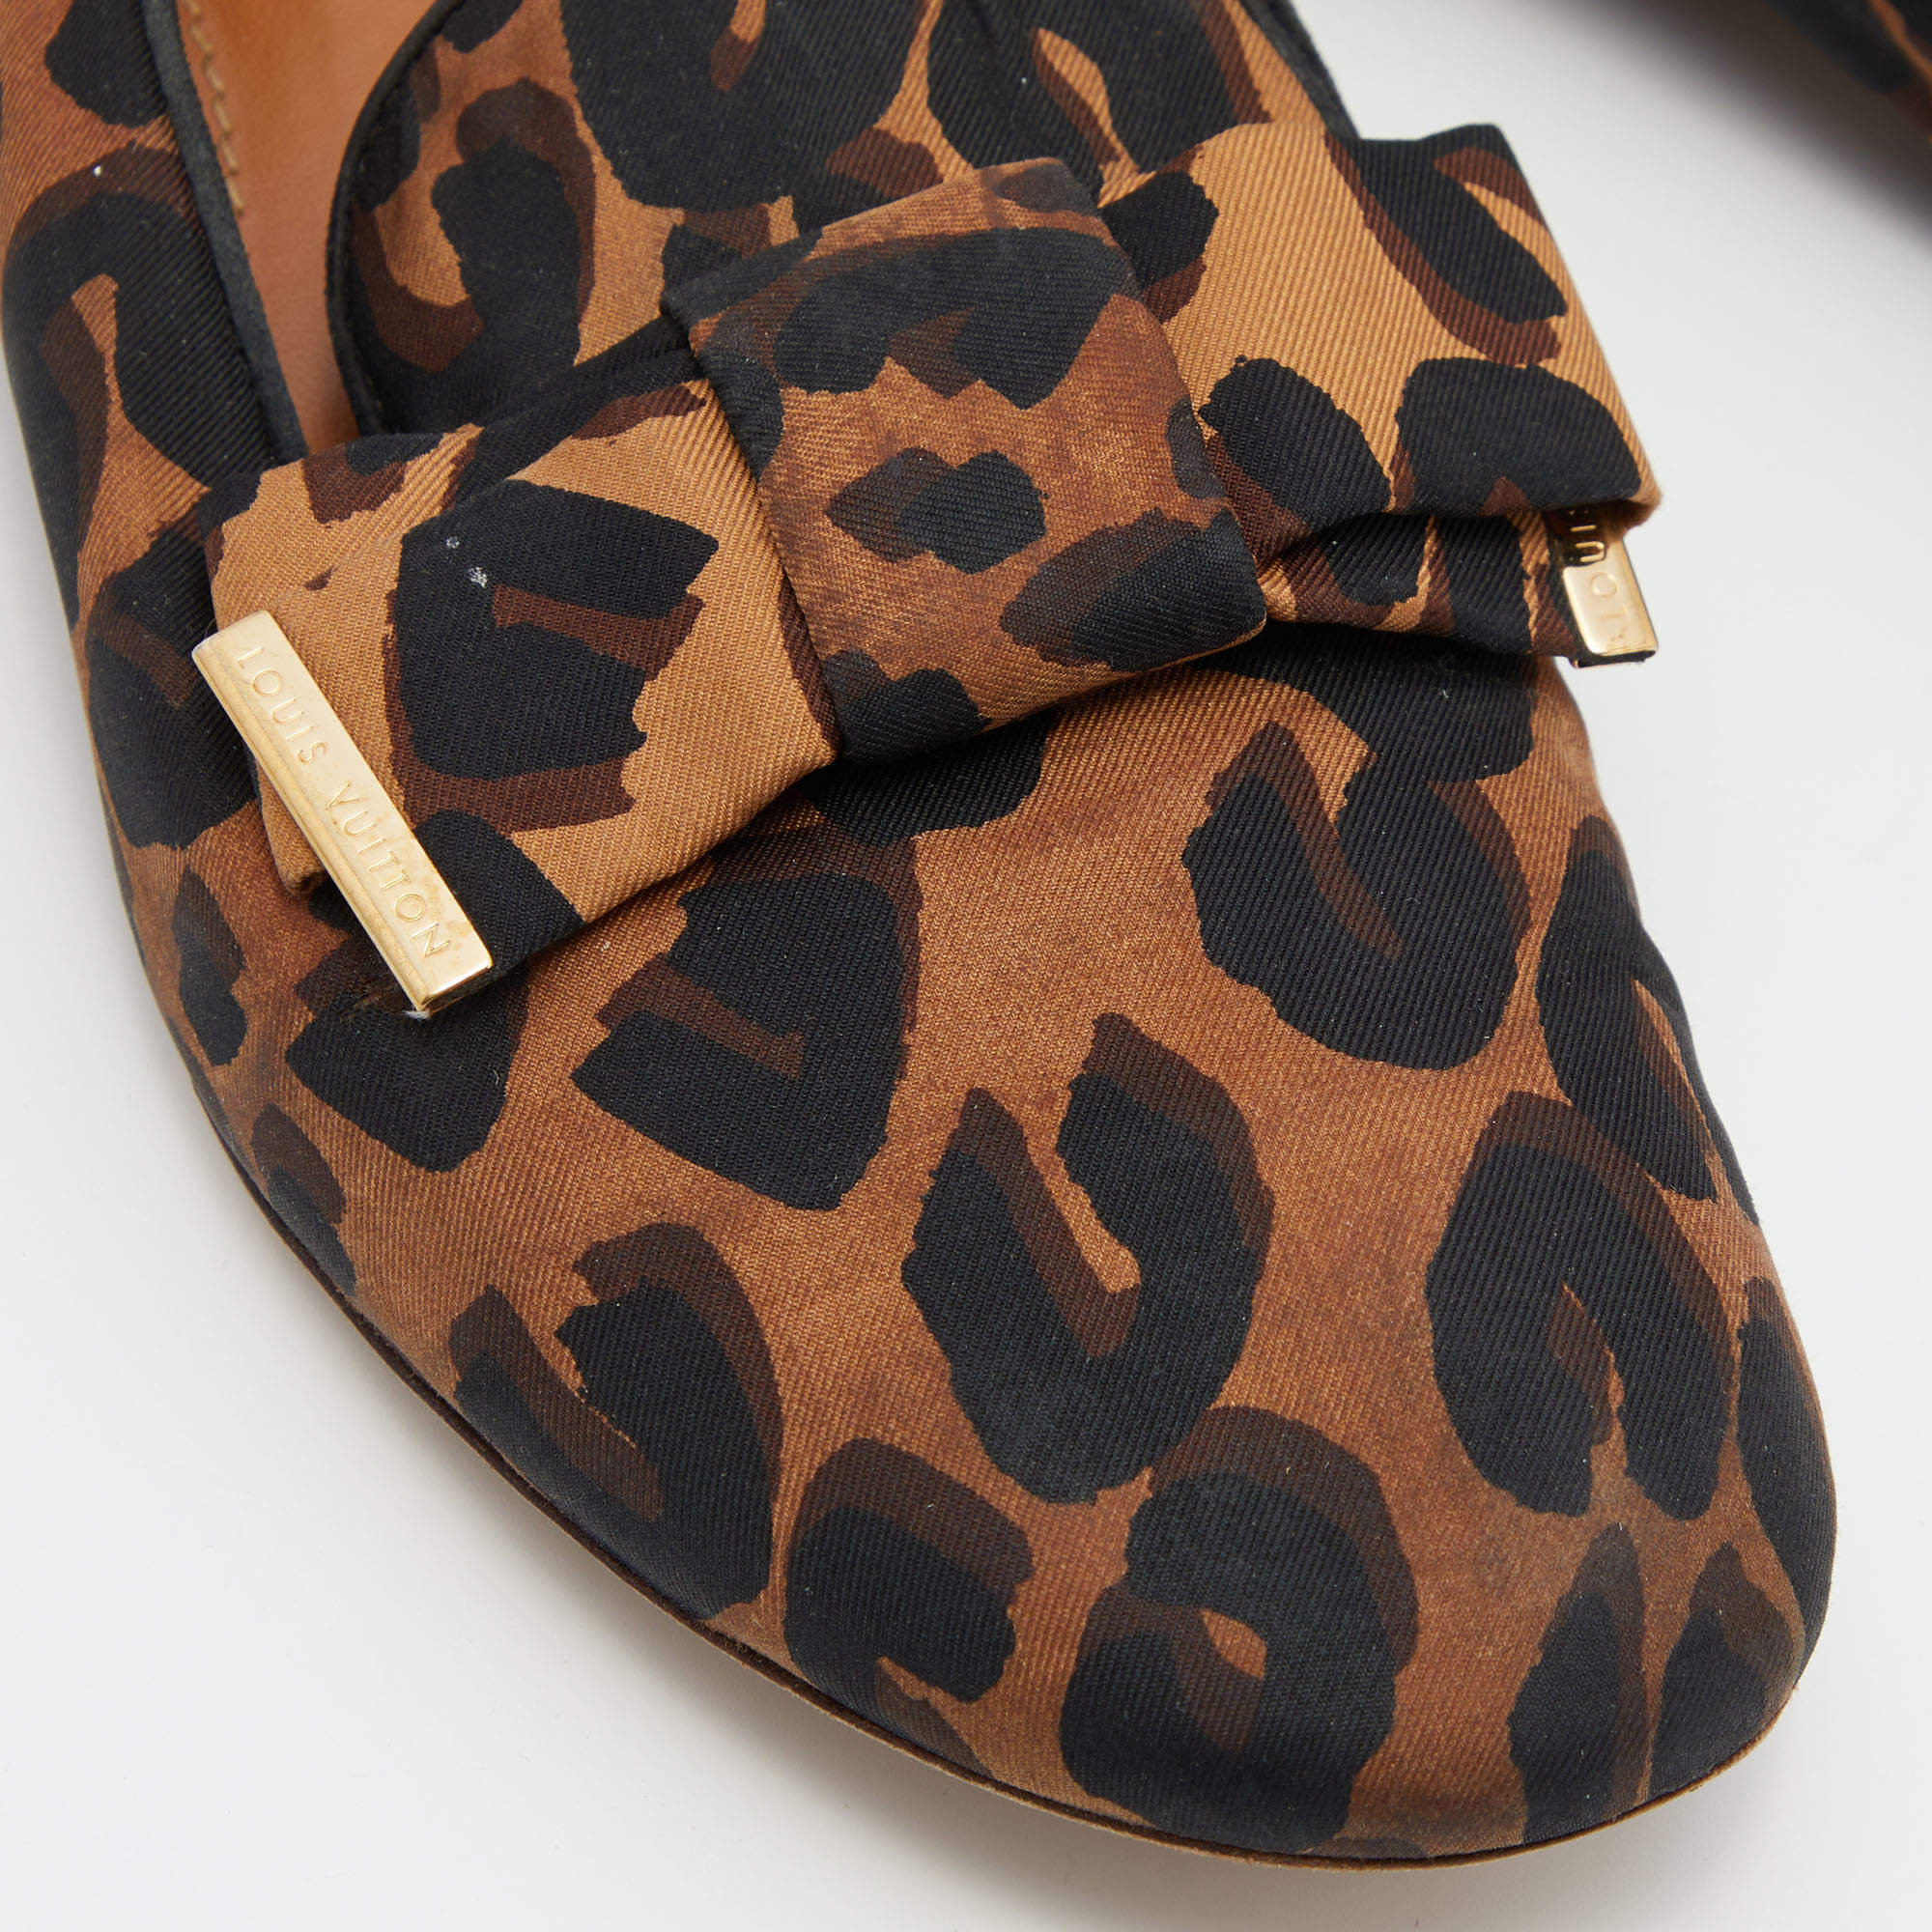 Louis Vuitton Brown Leopard Printed Fabric Bow Detail Smoking Slippers Size  39